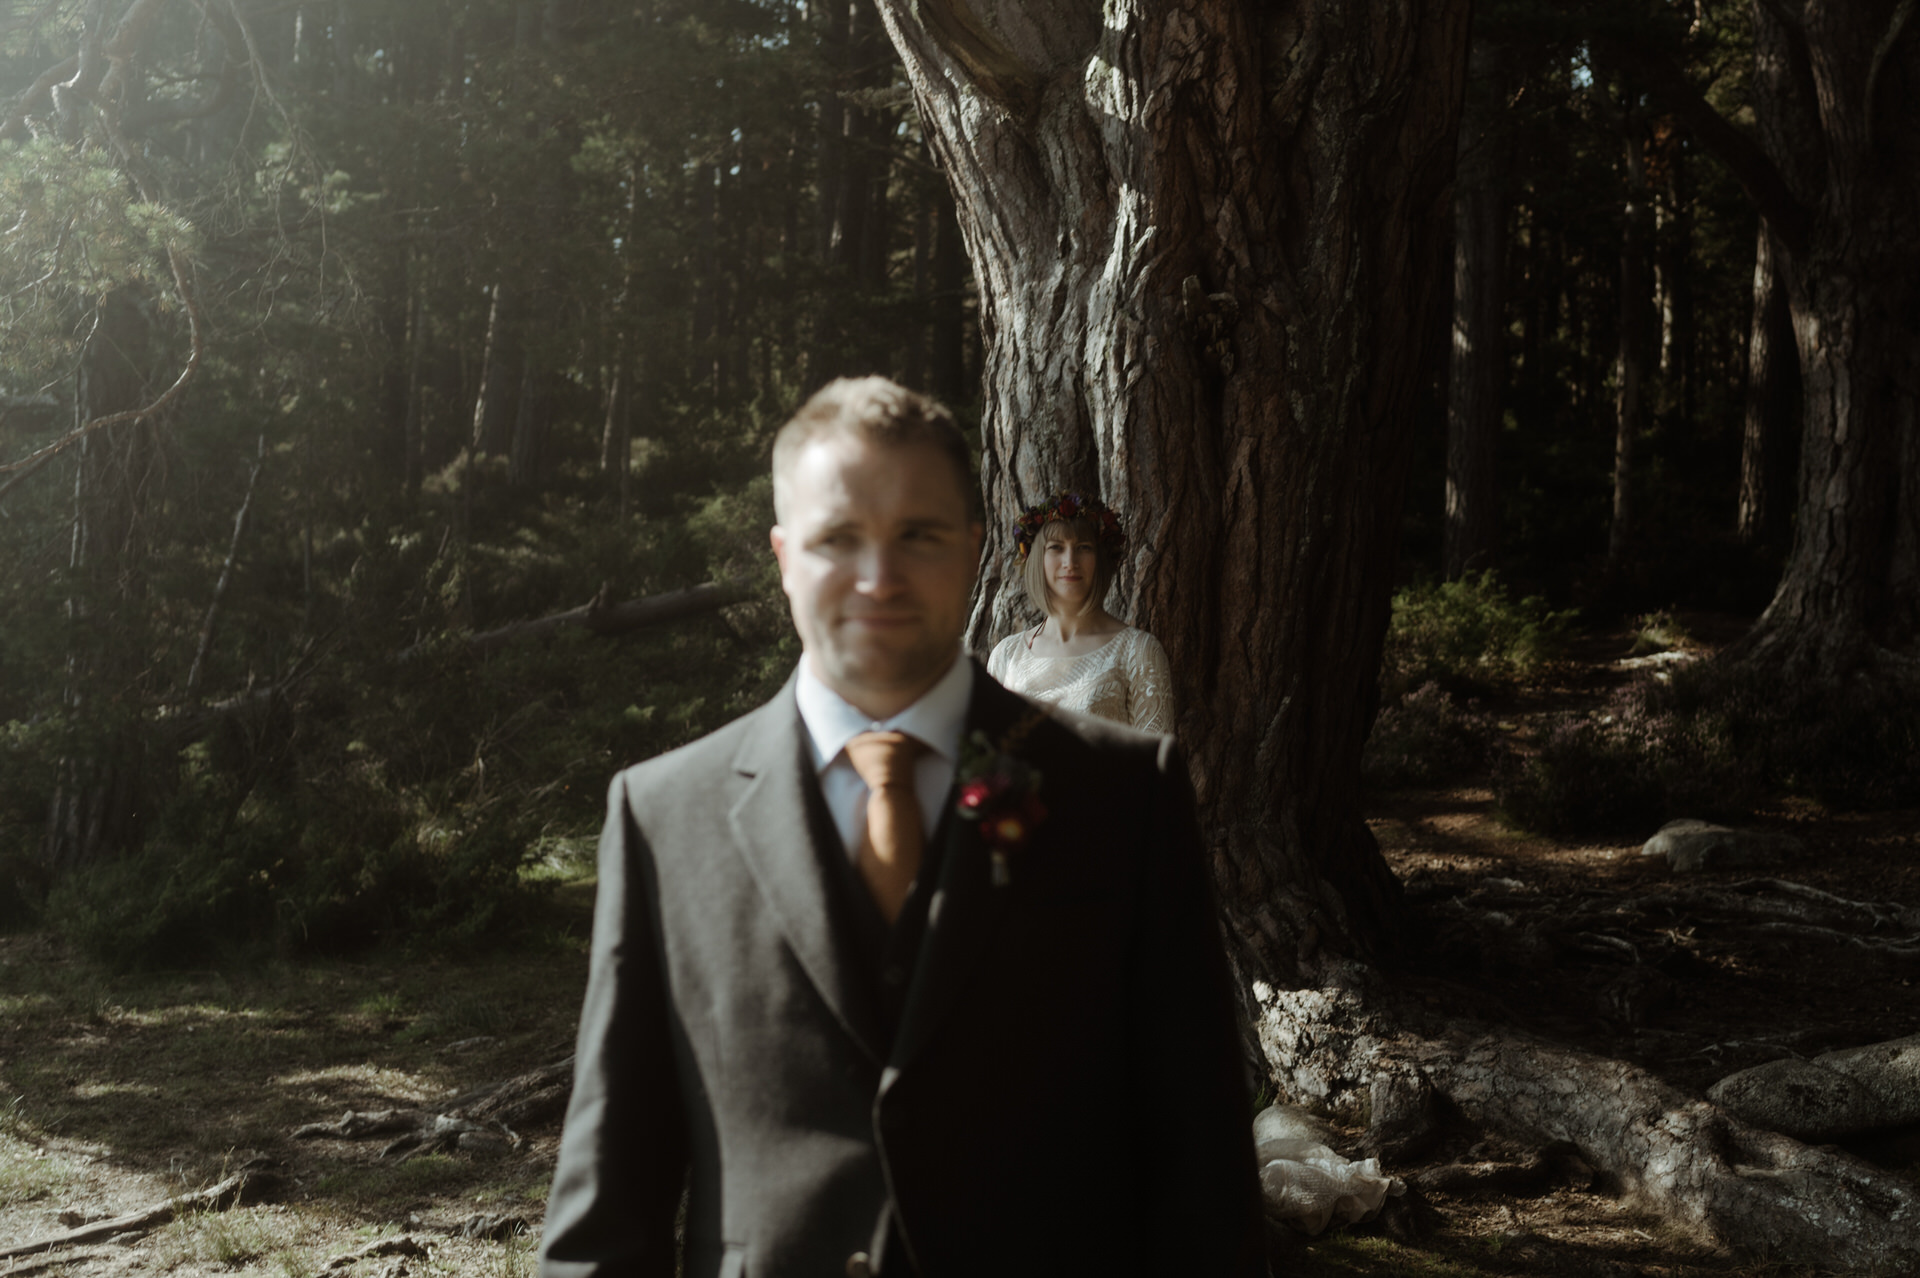 Bride and Groom in Woodland in the Cairngorm's national park on a Sunny day during their elopement